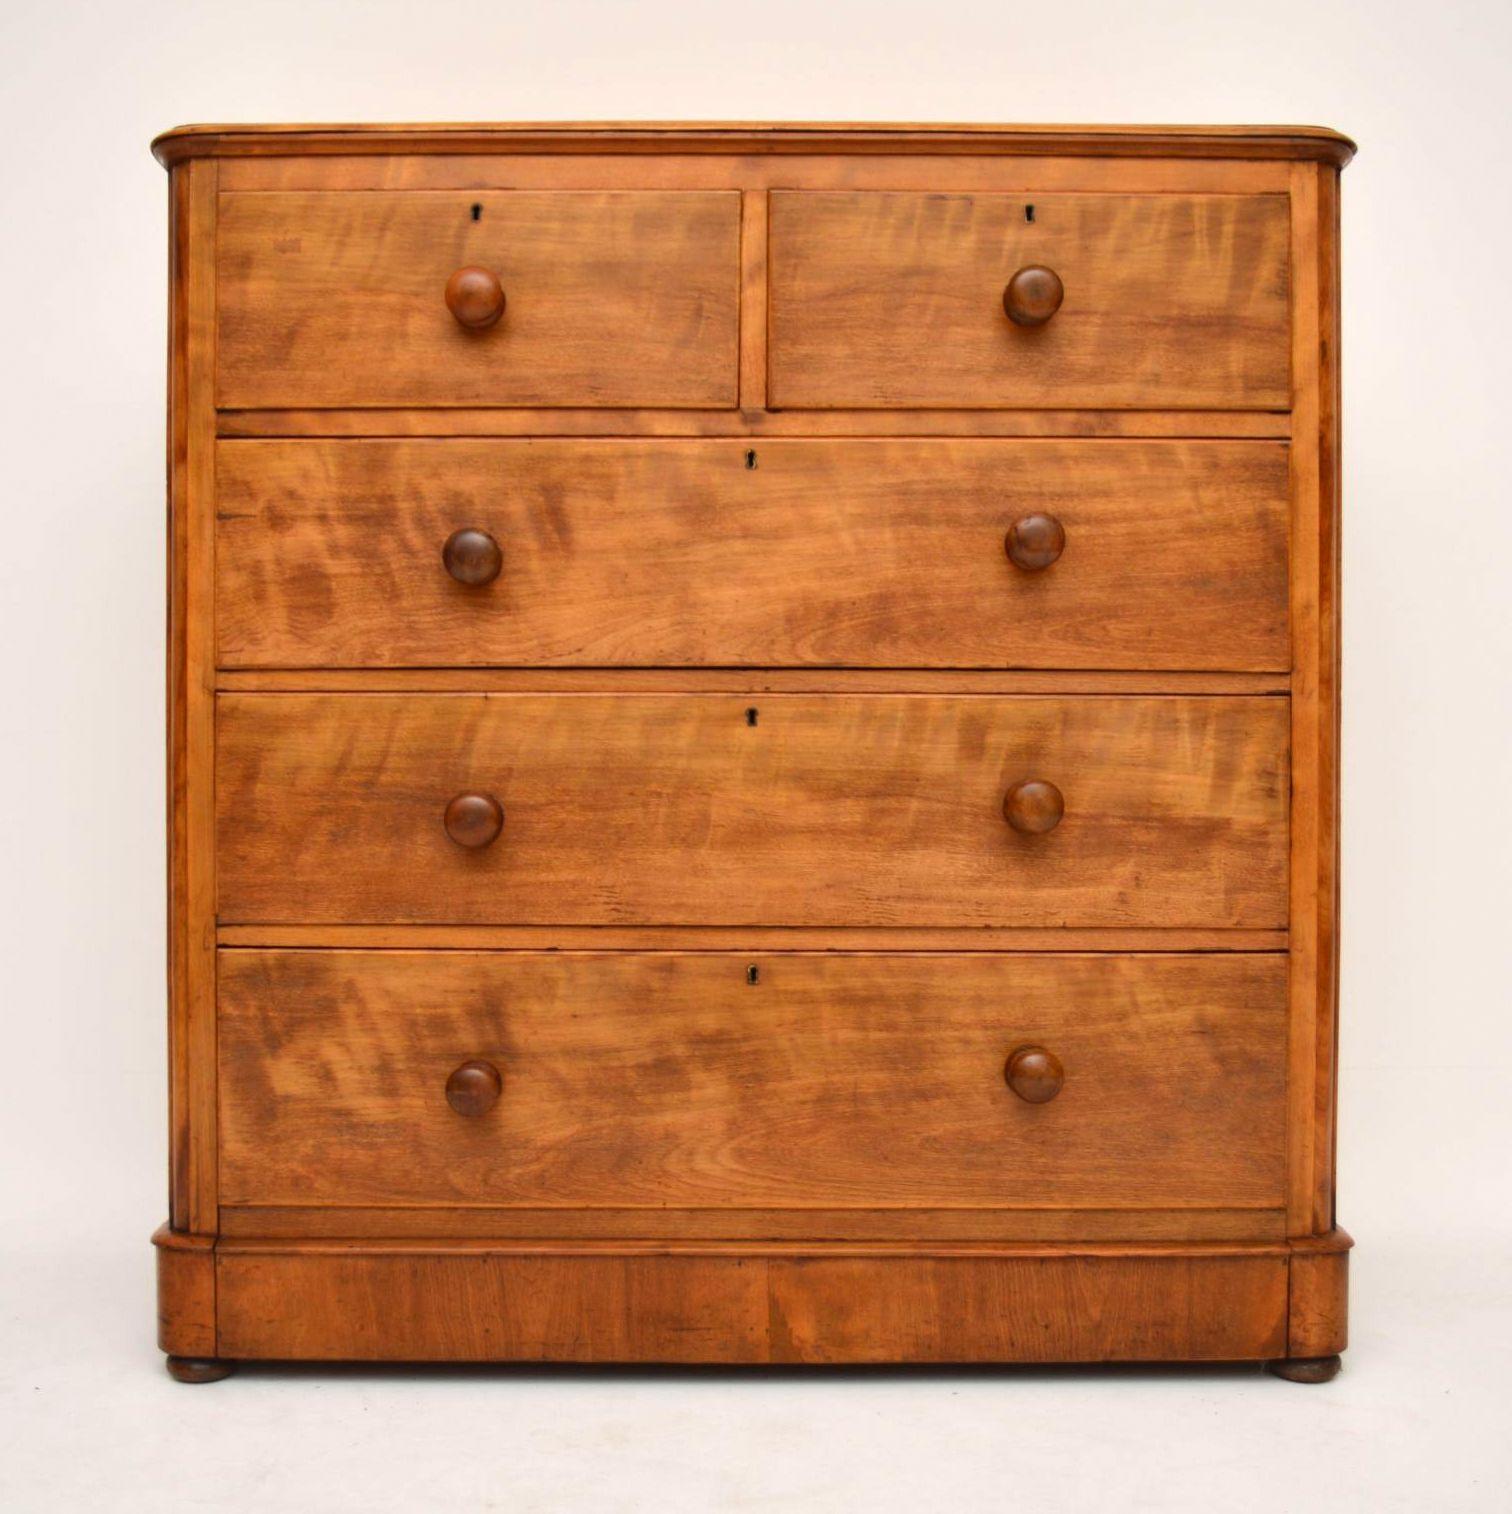 Large chunky antique Victorian chest of drawers in satin birch with a lovely silky finish on the surface. All the drawers are deep and graduated, while the bottom drawer is extra deep, because it is attached to the plinth. The drawers also have